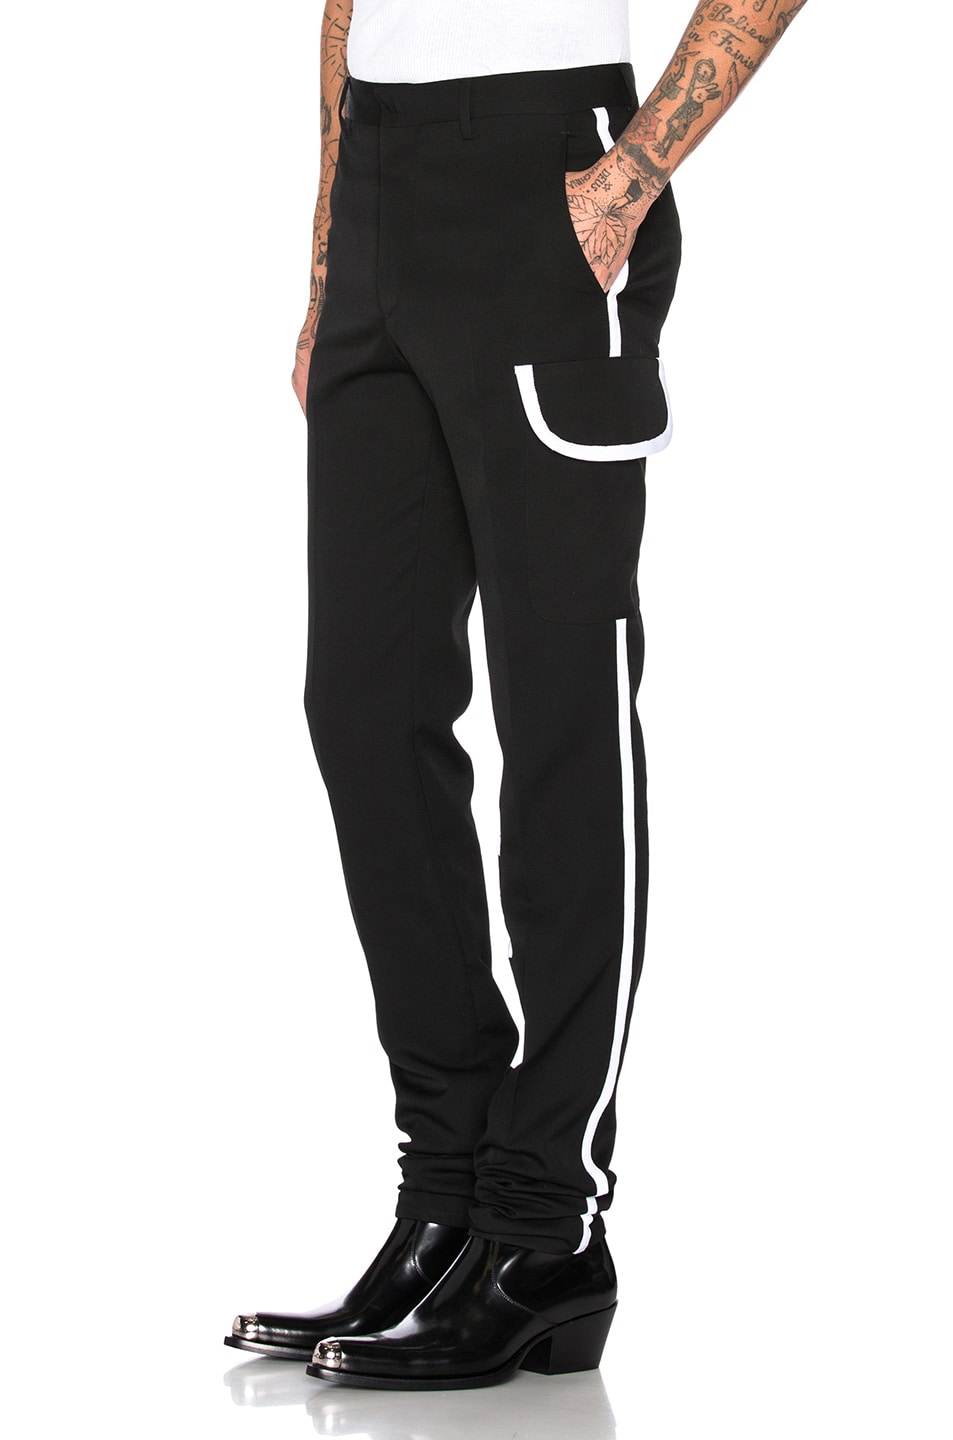 Image 1 of CALVIN KLEIN 205W39NYC Cigarette Pant in Black & White